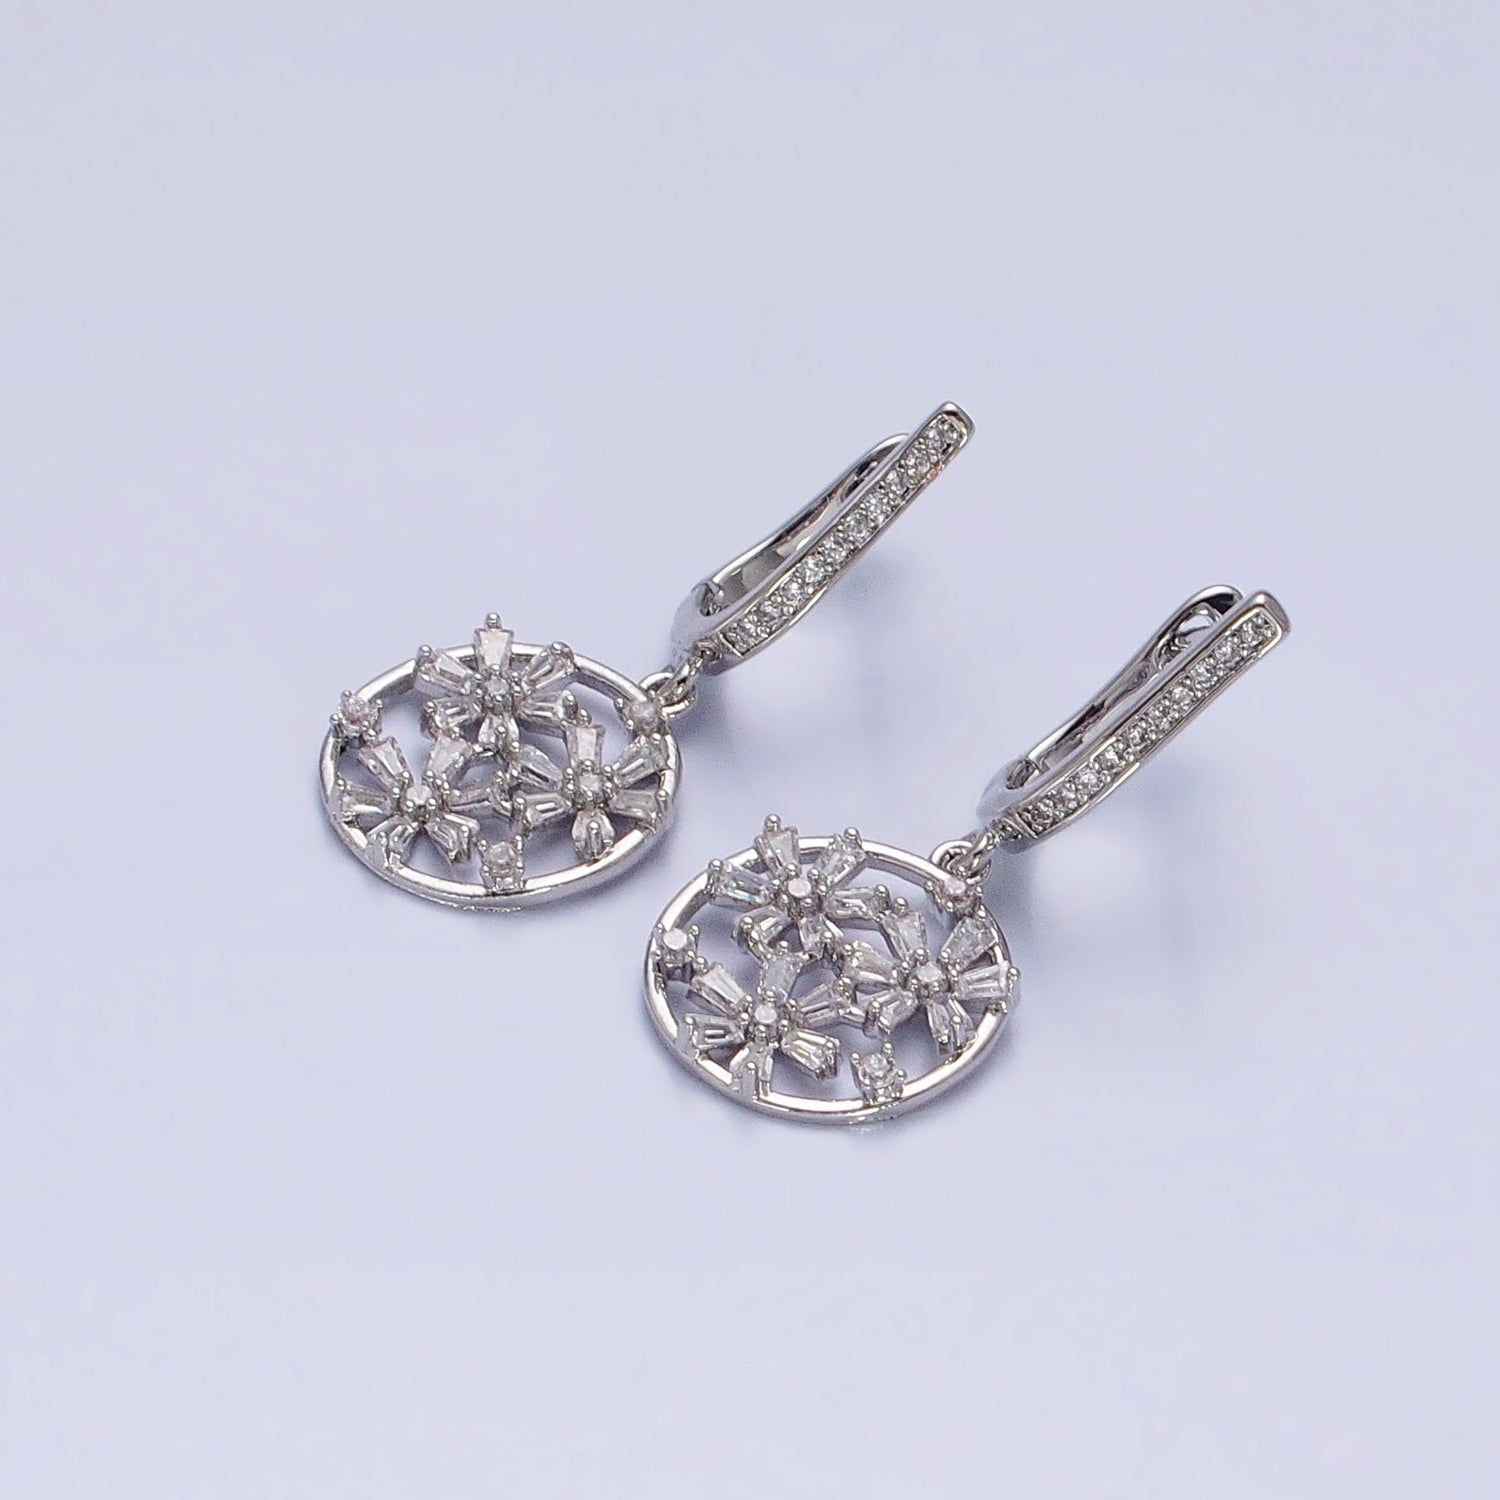 Gold, Silver Open Flowers Baguette Micro Paved CZ English Lock Earrings | AD808 AD809 - DLUXCA